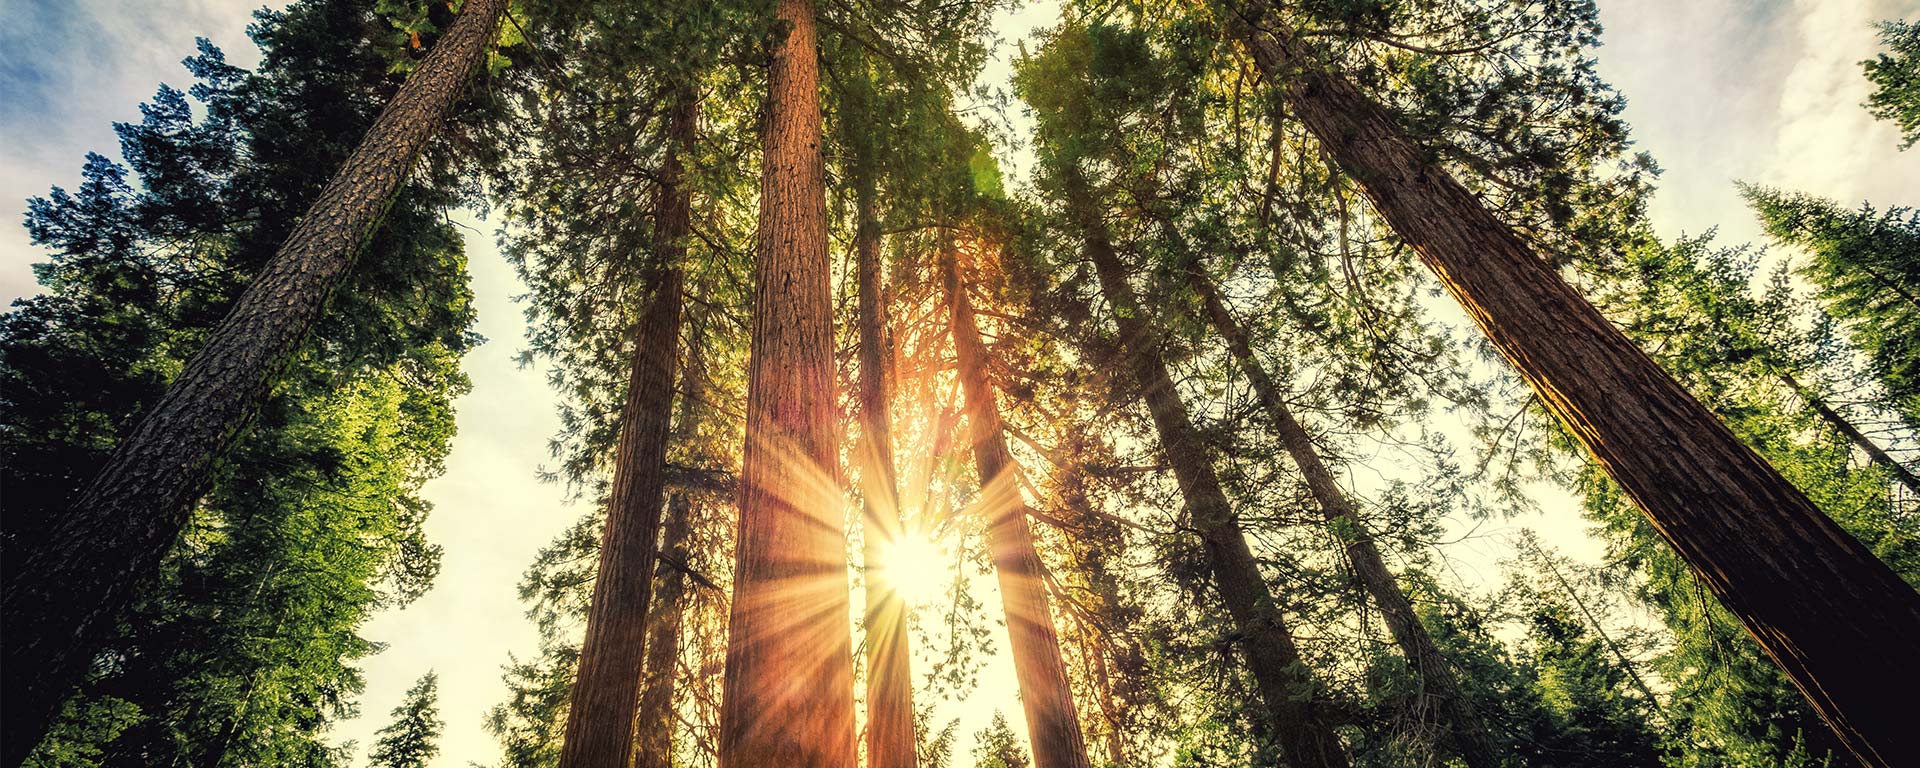 View from the ground of tall trees and the sun.